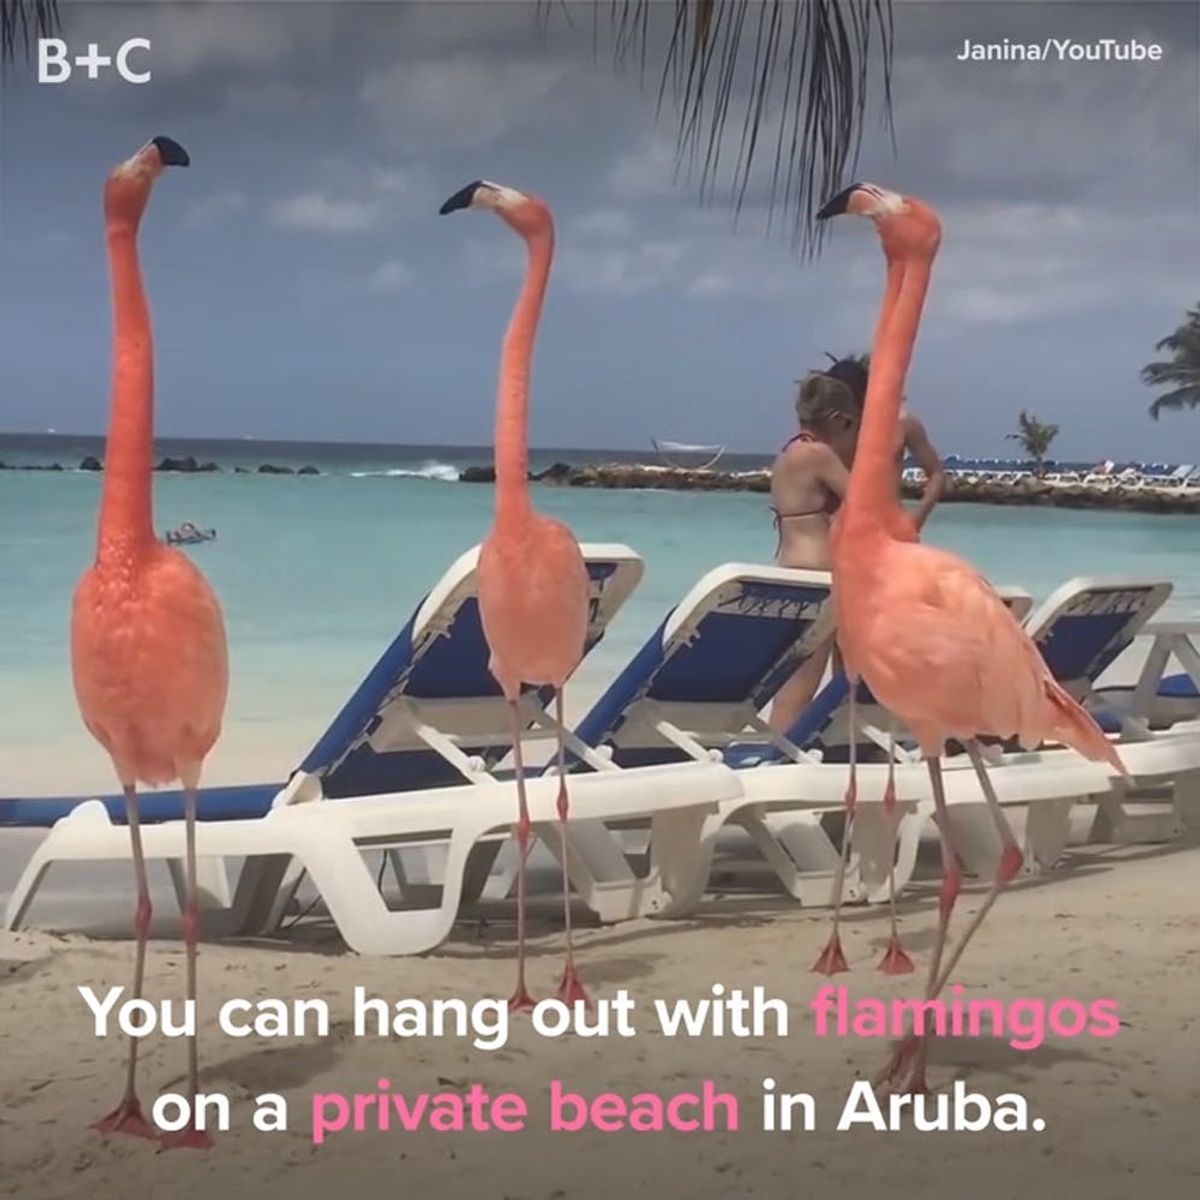 Aruba’s Flamingo Beach Is *Officially* At the Top of Our Travel List